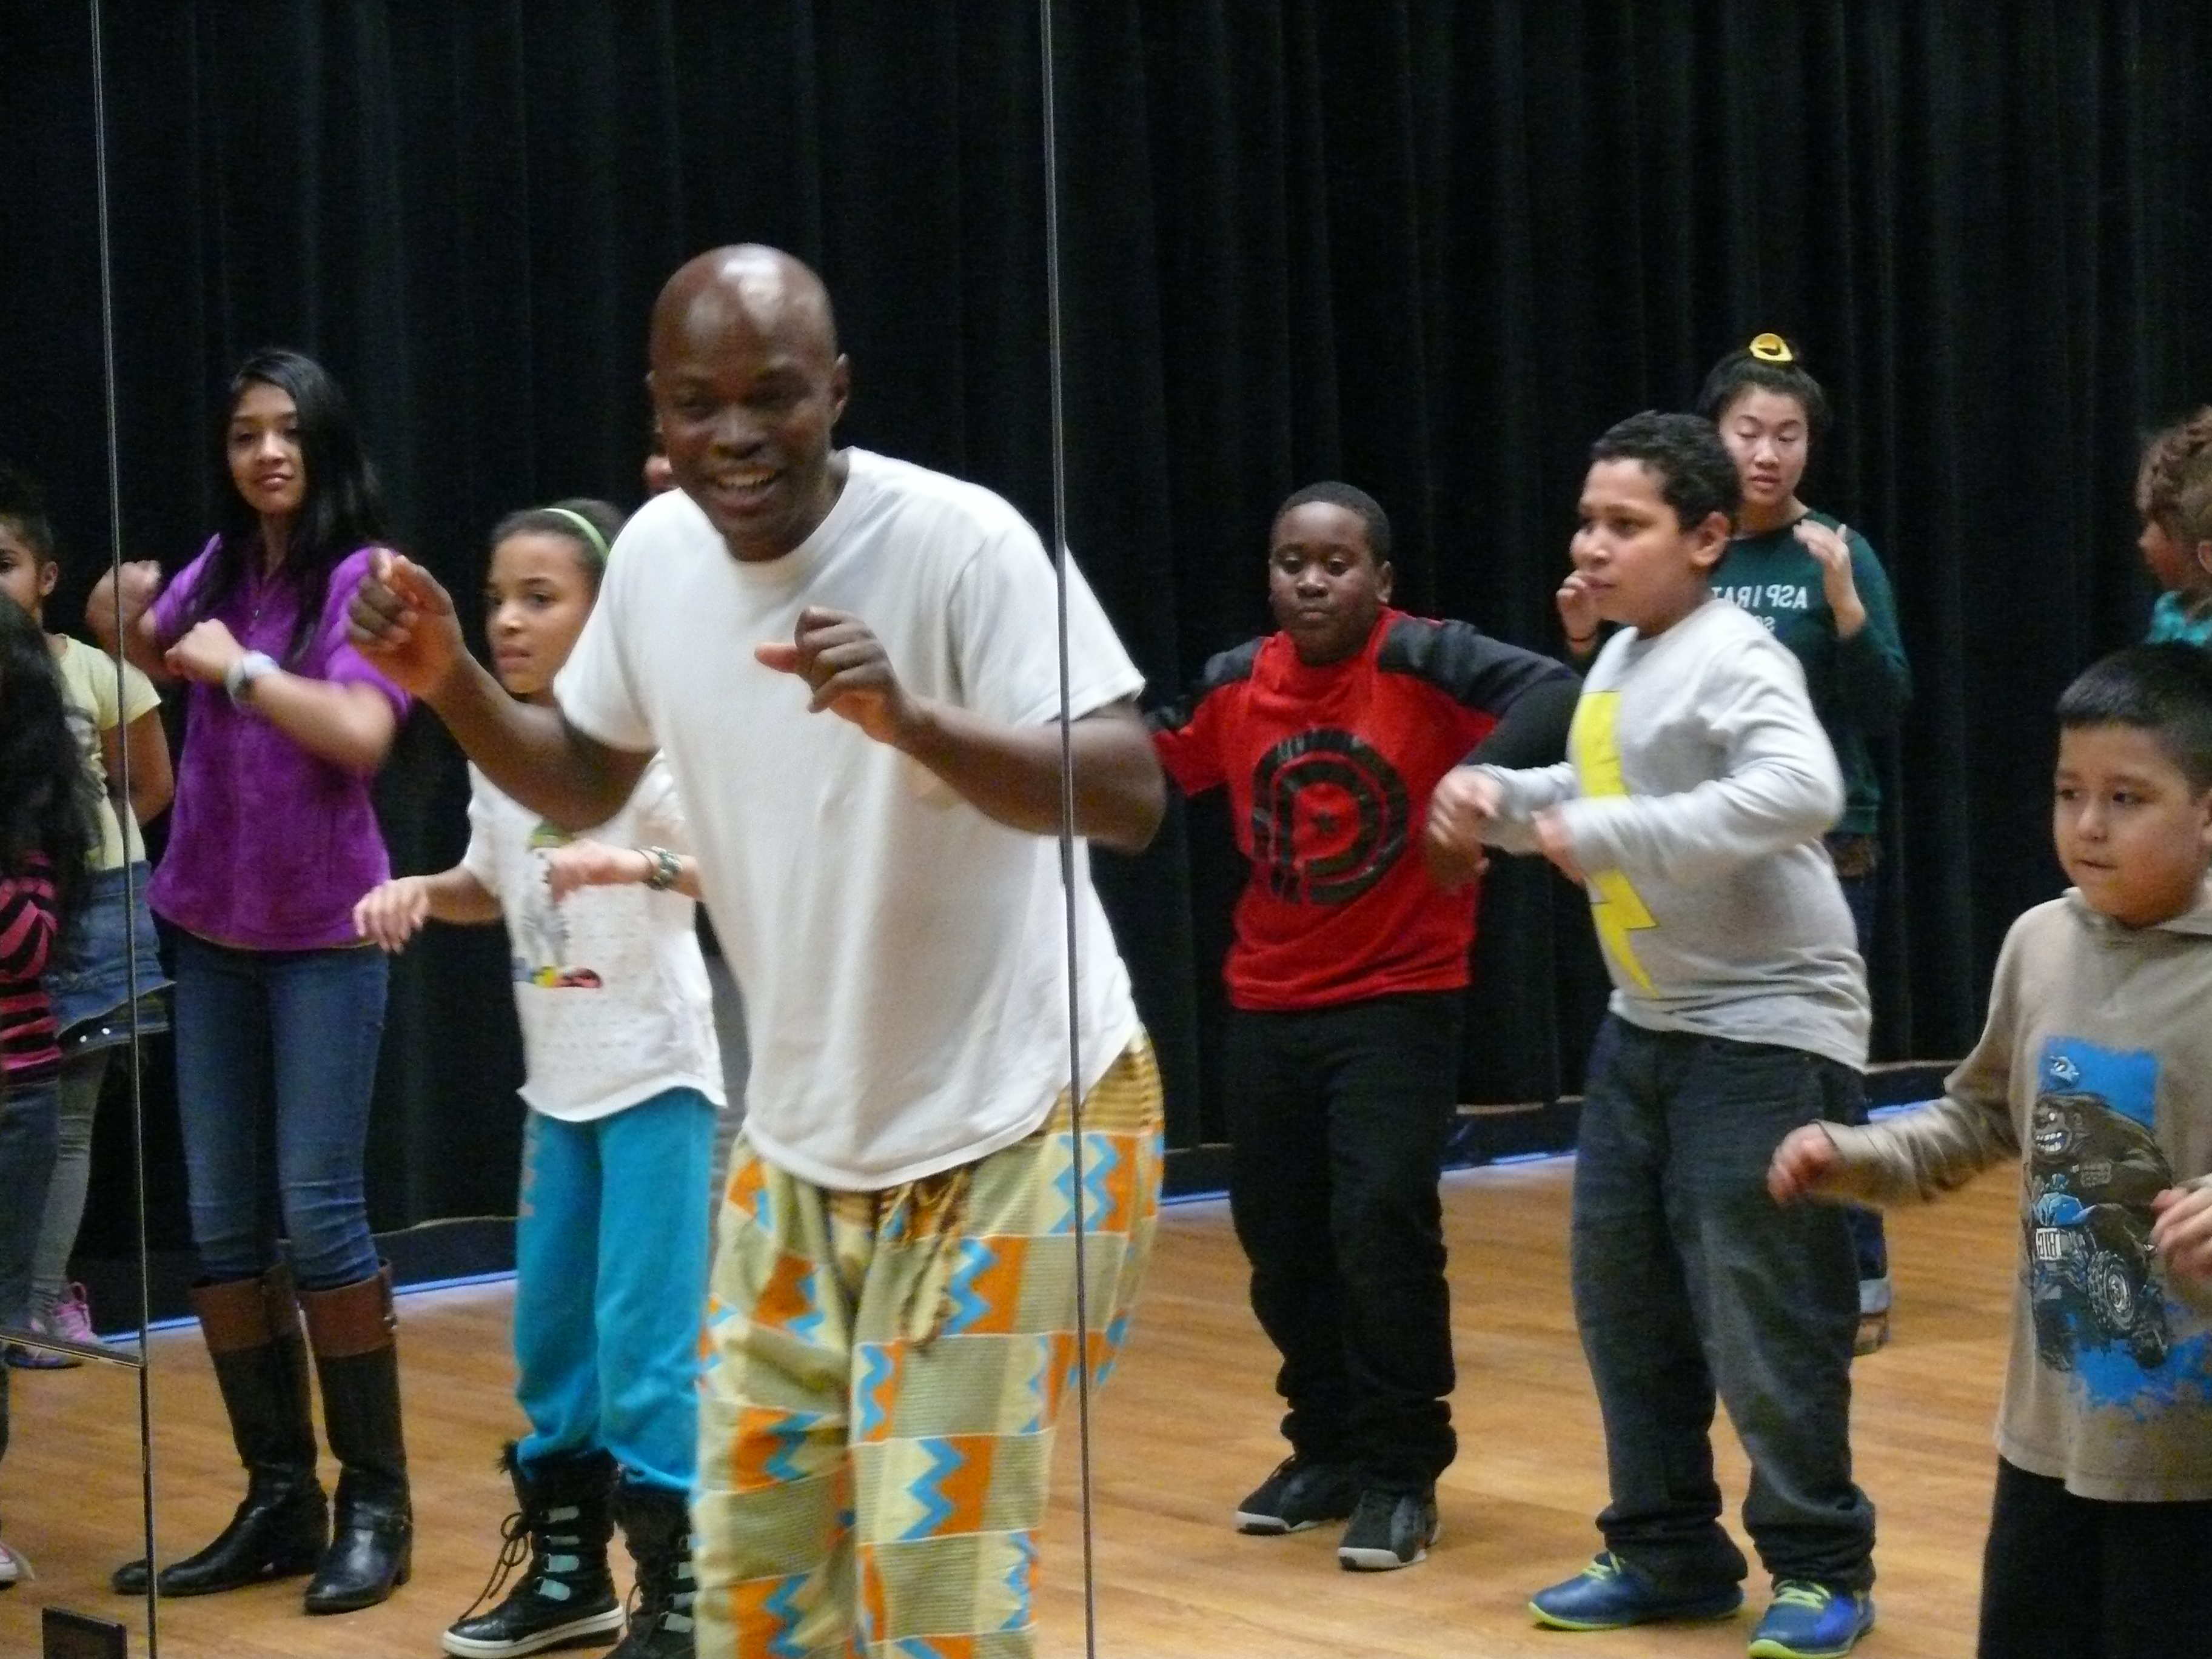 On March 11, Artist-in-Residence Iddrisu Saaka led a lively afternoon of dance, rhythms and games from his native country of Ghana.